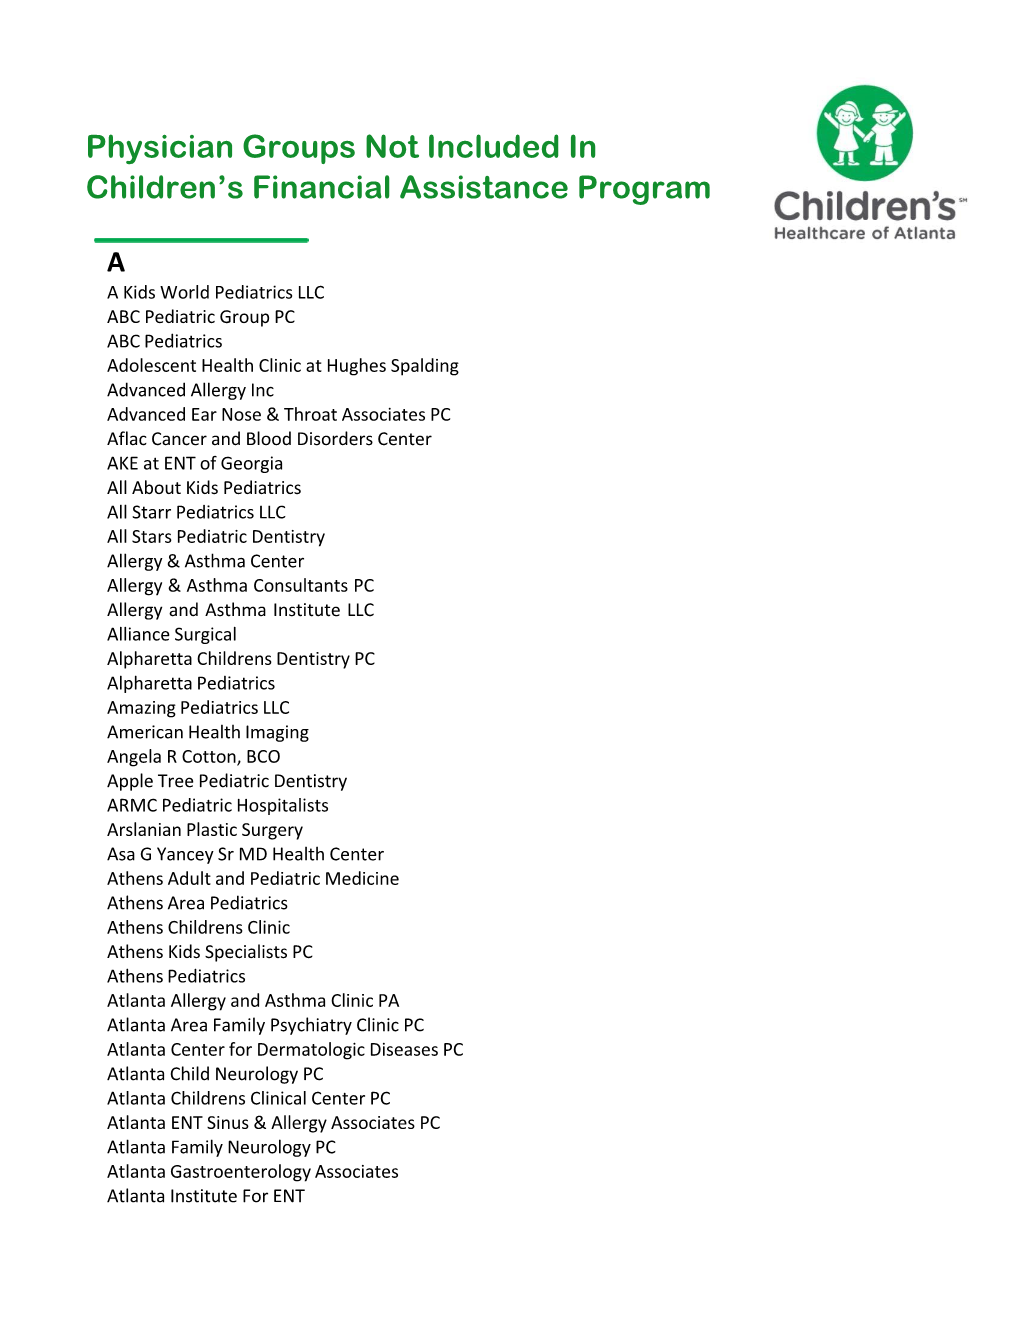 Physician Groups Not Included in Children's Financial Assistance Program